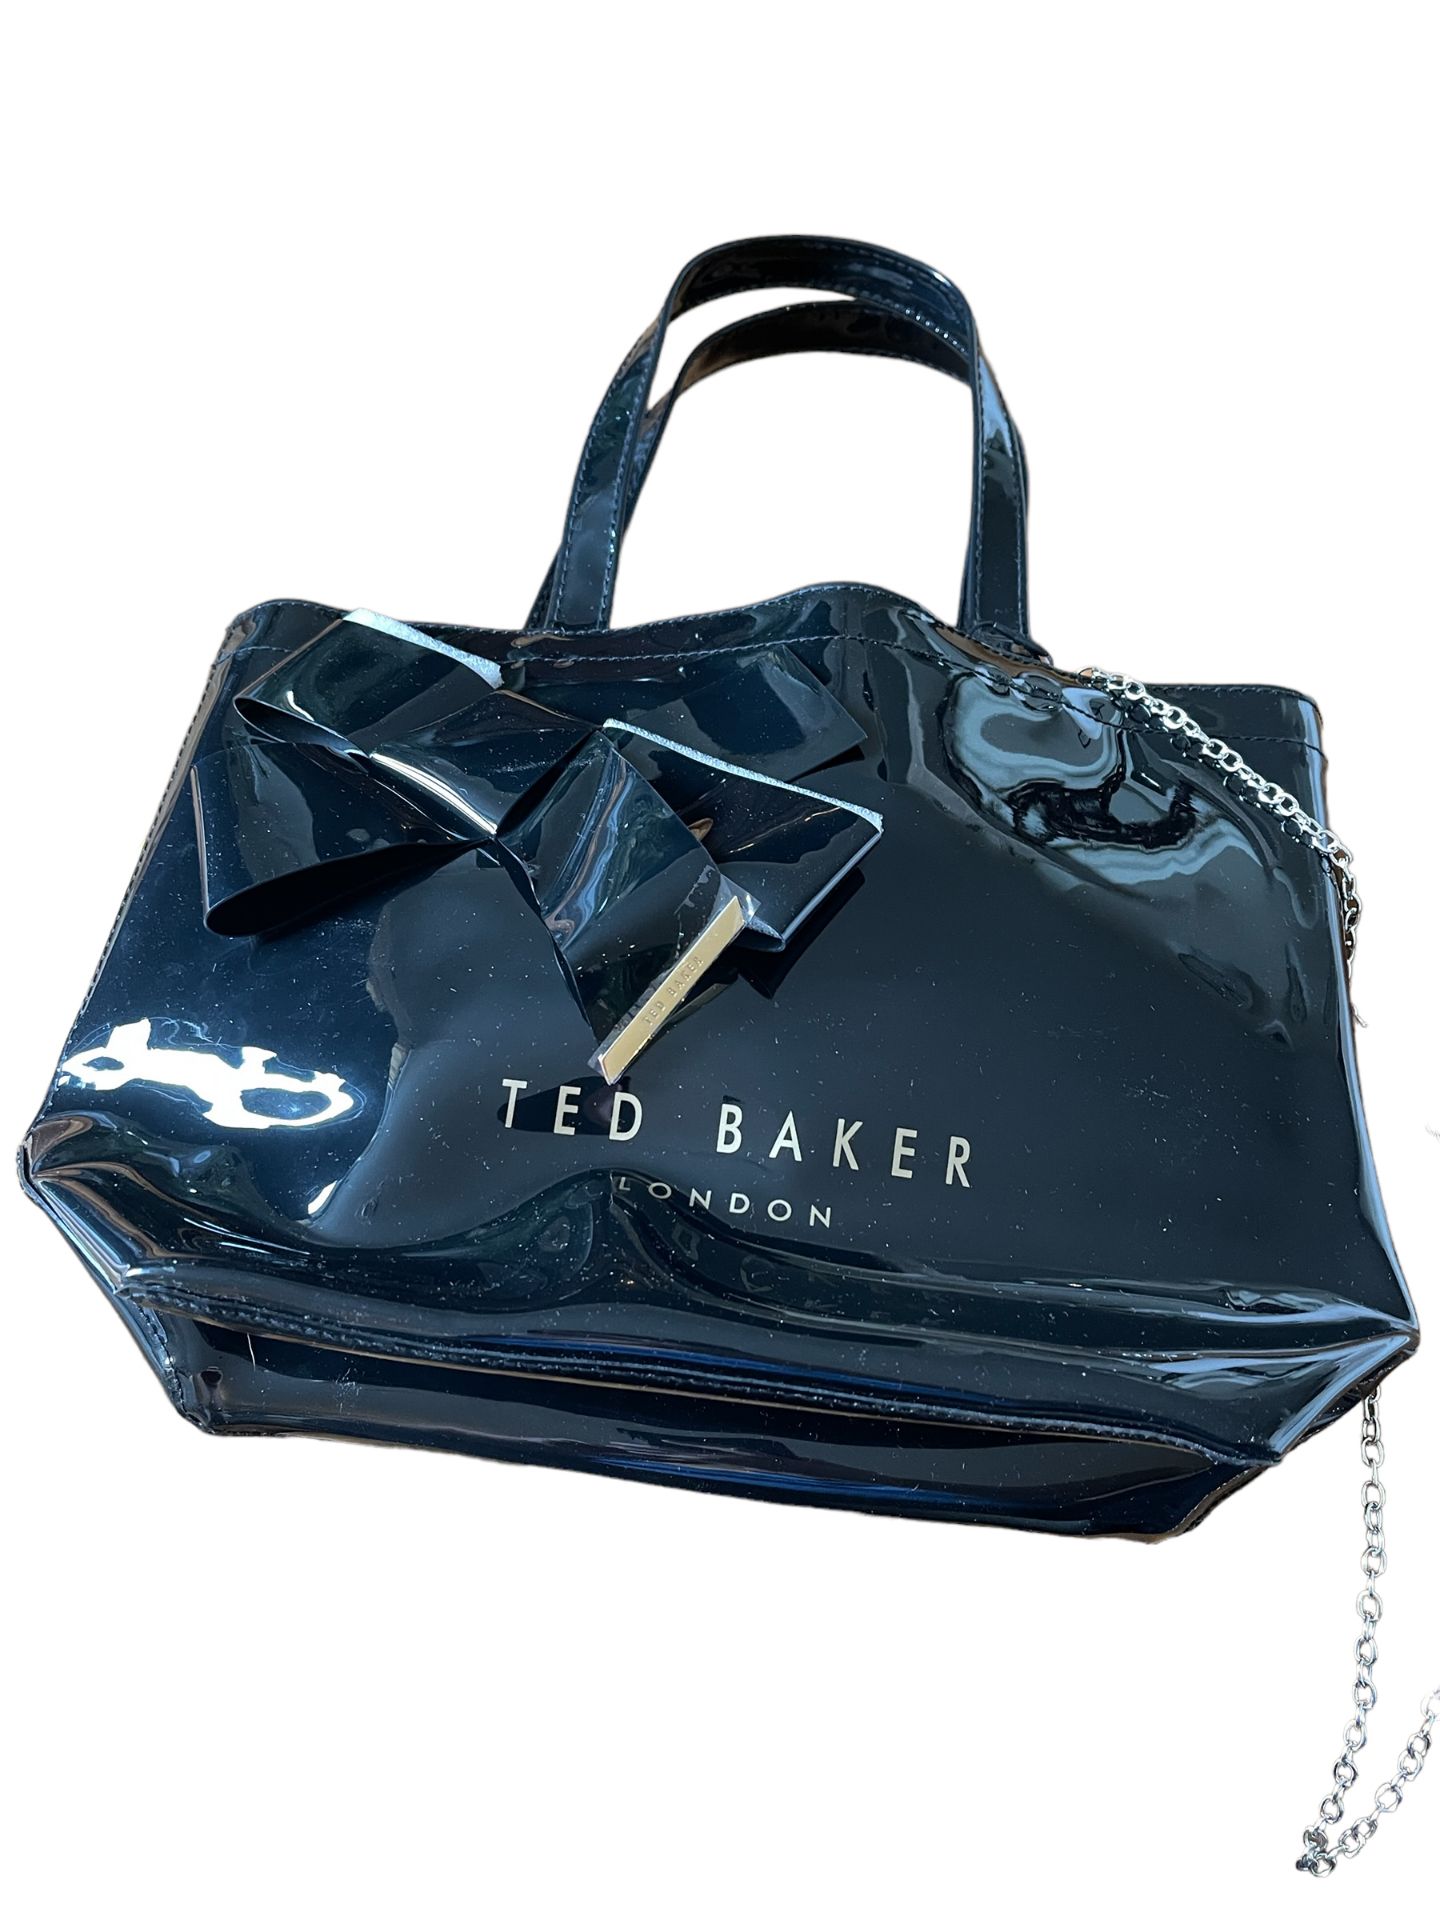 Ted Baker Brand New Bag with small Evening bag, unclaimed lost property - Image 4 of 6